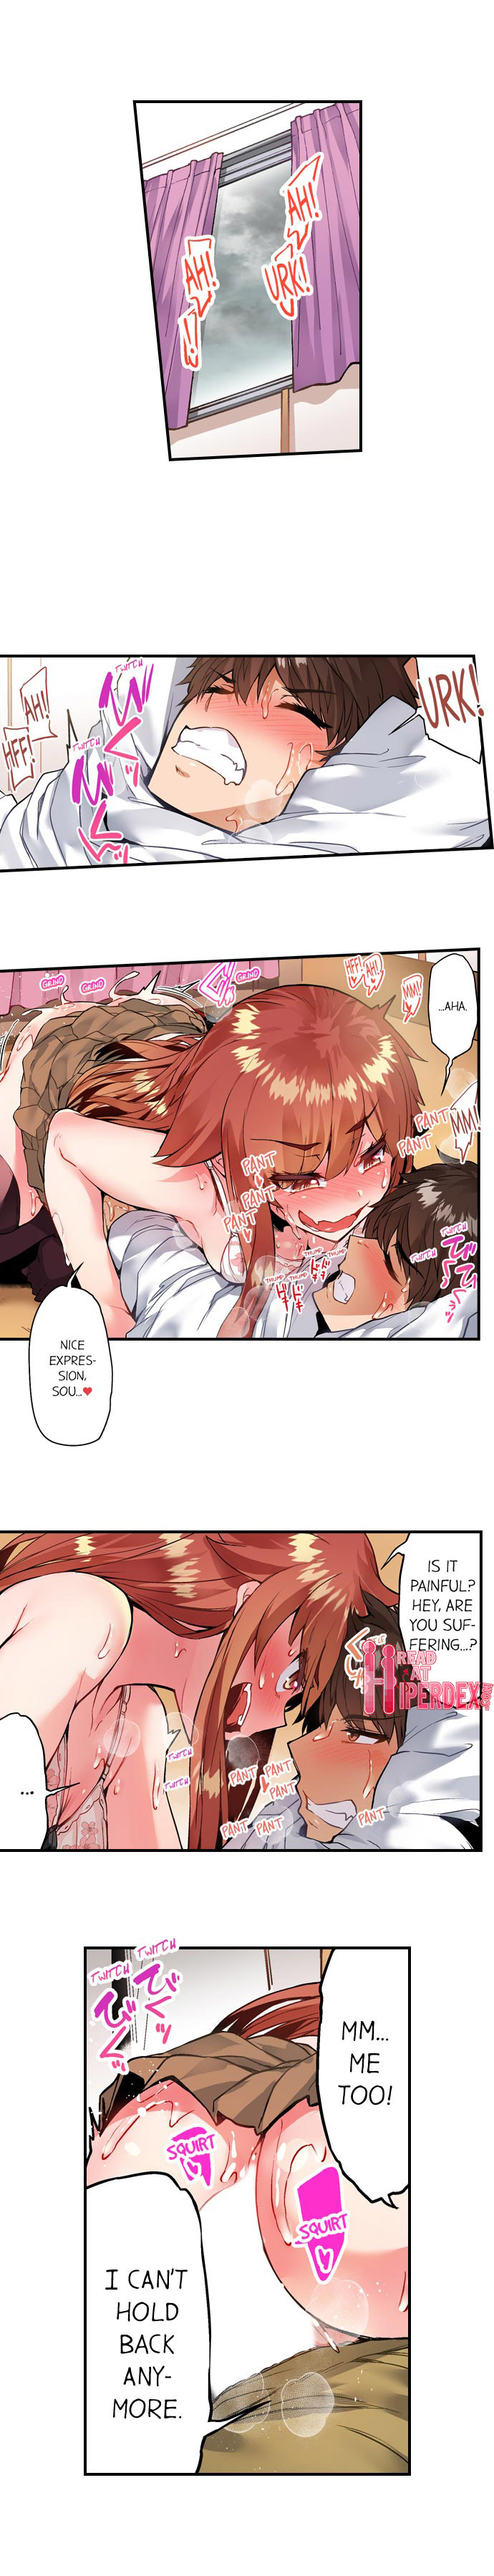 Traditional Job of Washing Girls’ Body - Chapter 120 Page 2